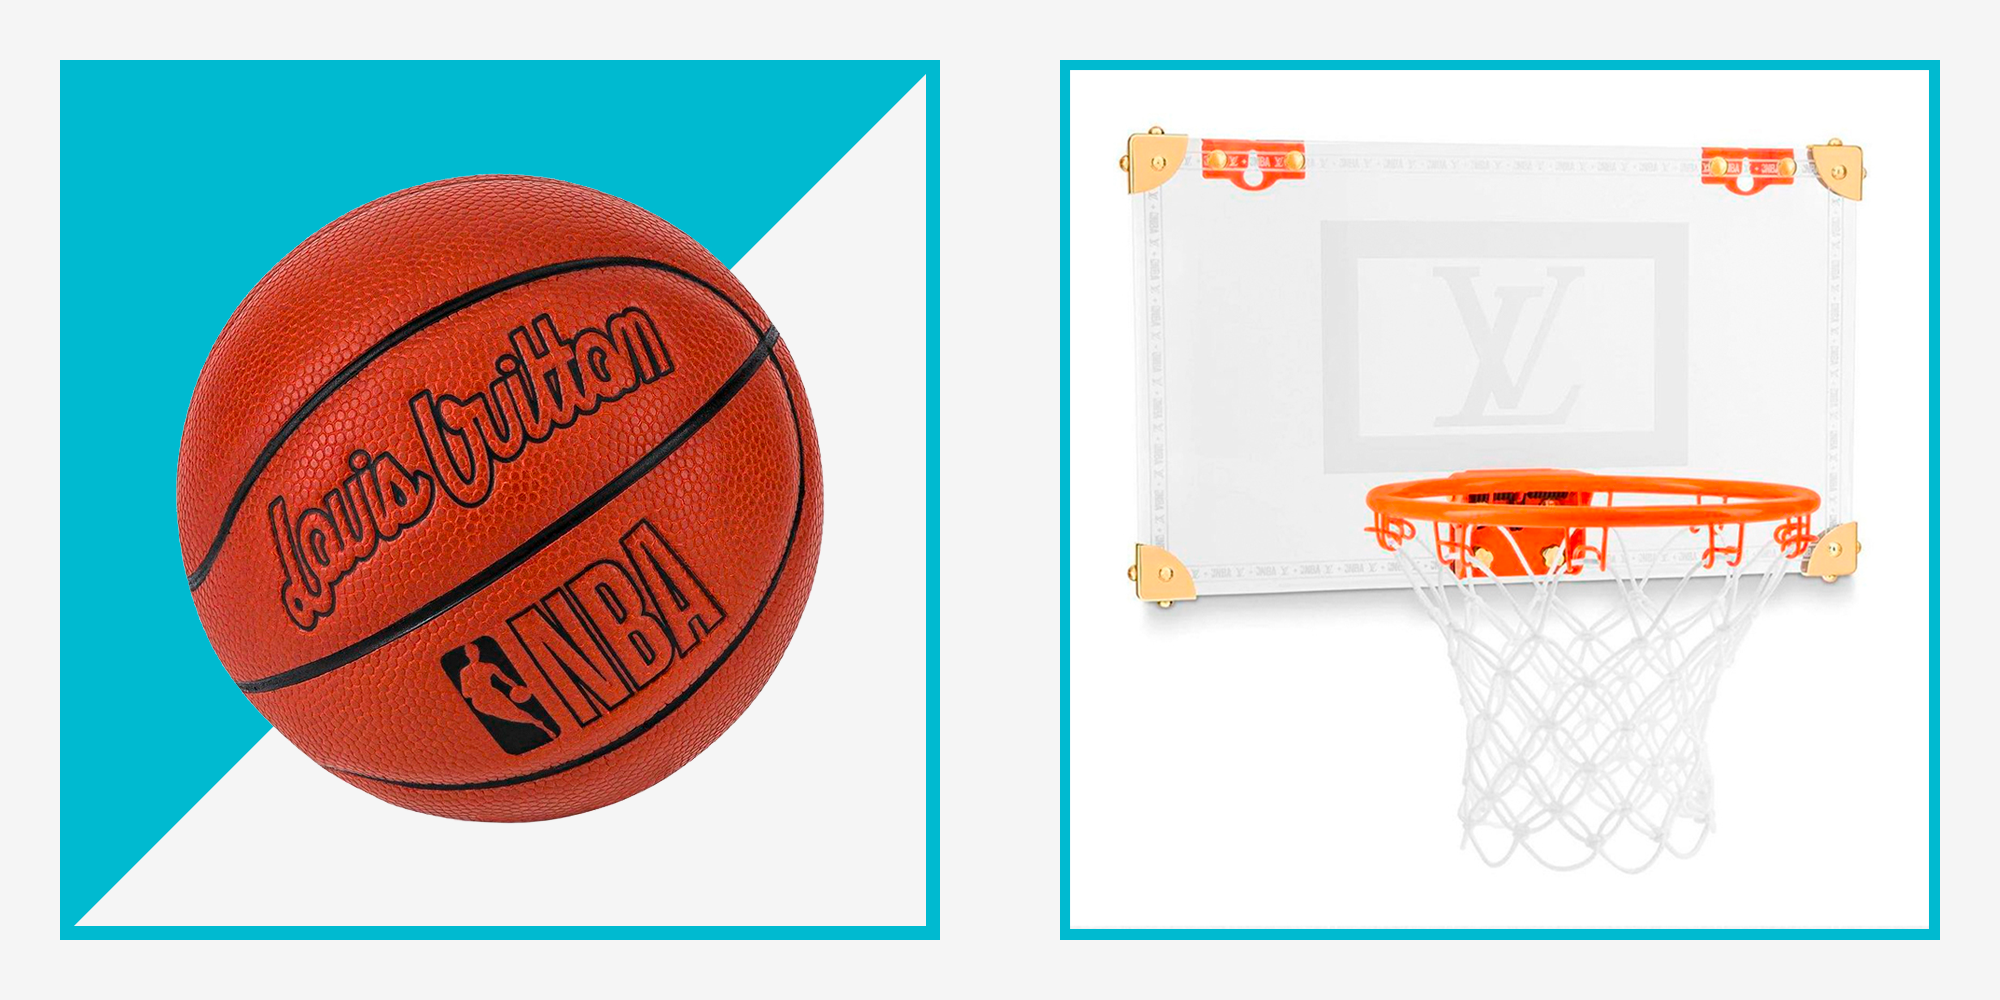 Can Buy a Louis Vuitton Branded Basketball and Now